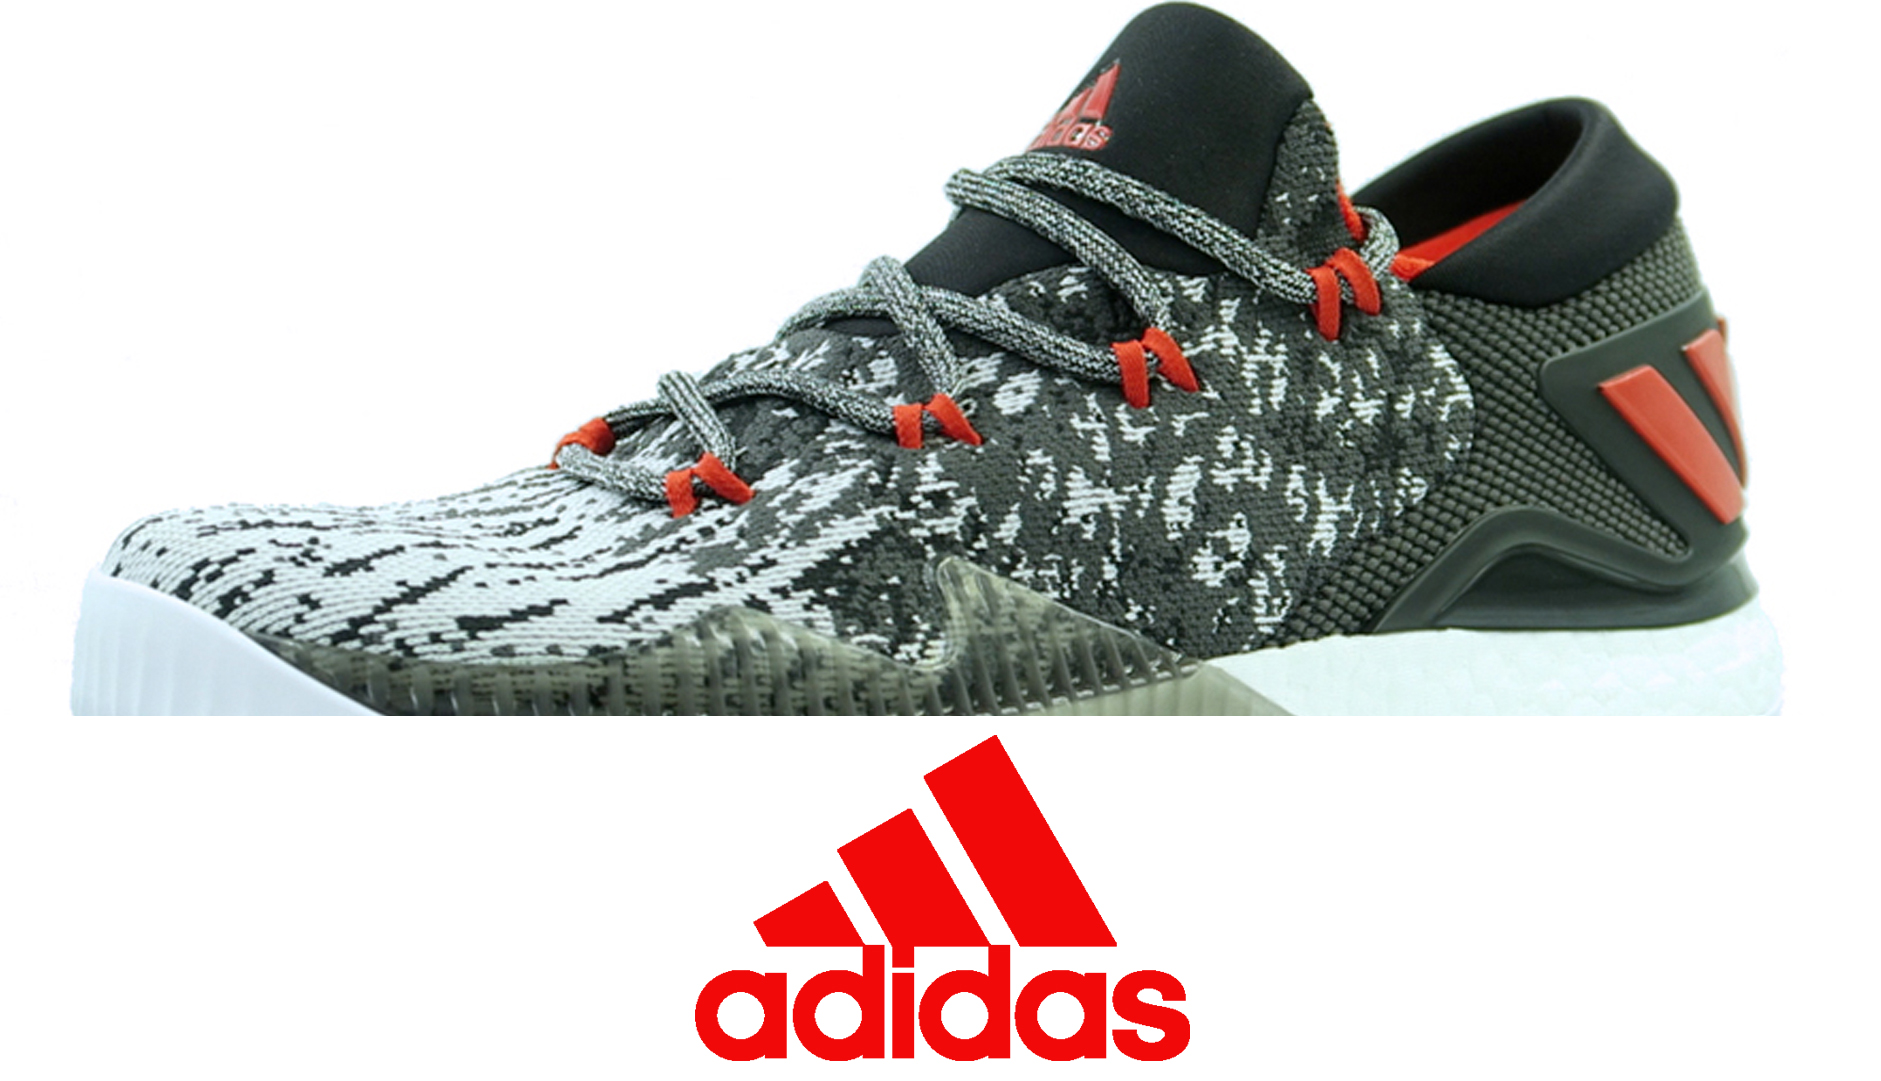 oído Electropositivo pedal adidas CrazyLight Boost 2016 PrimeKnit | Detailed Look and Review -  WearTesters